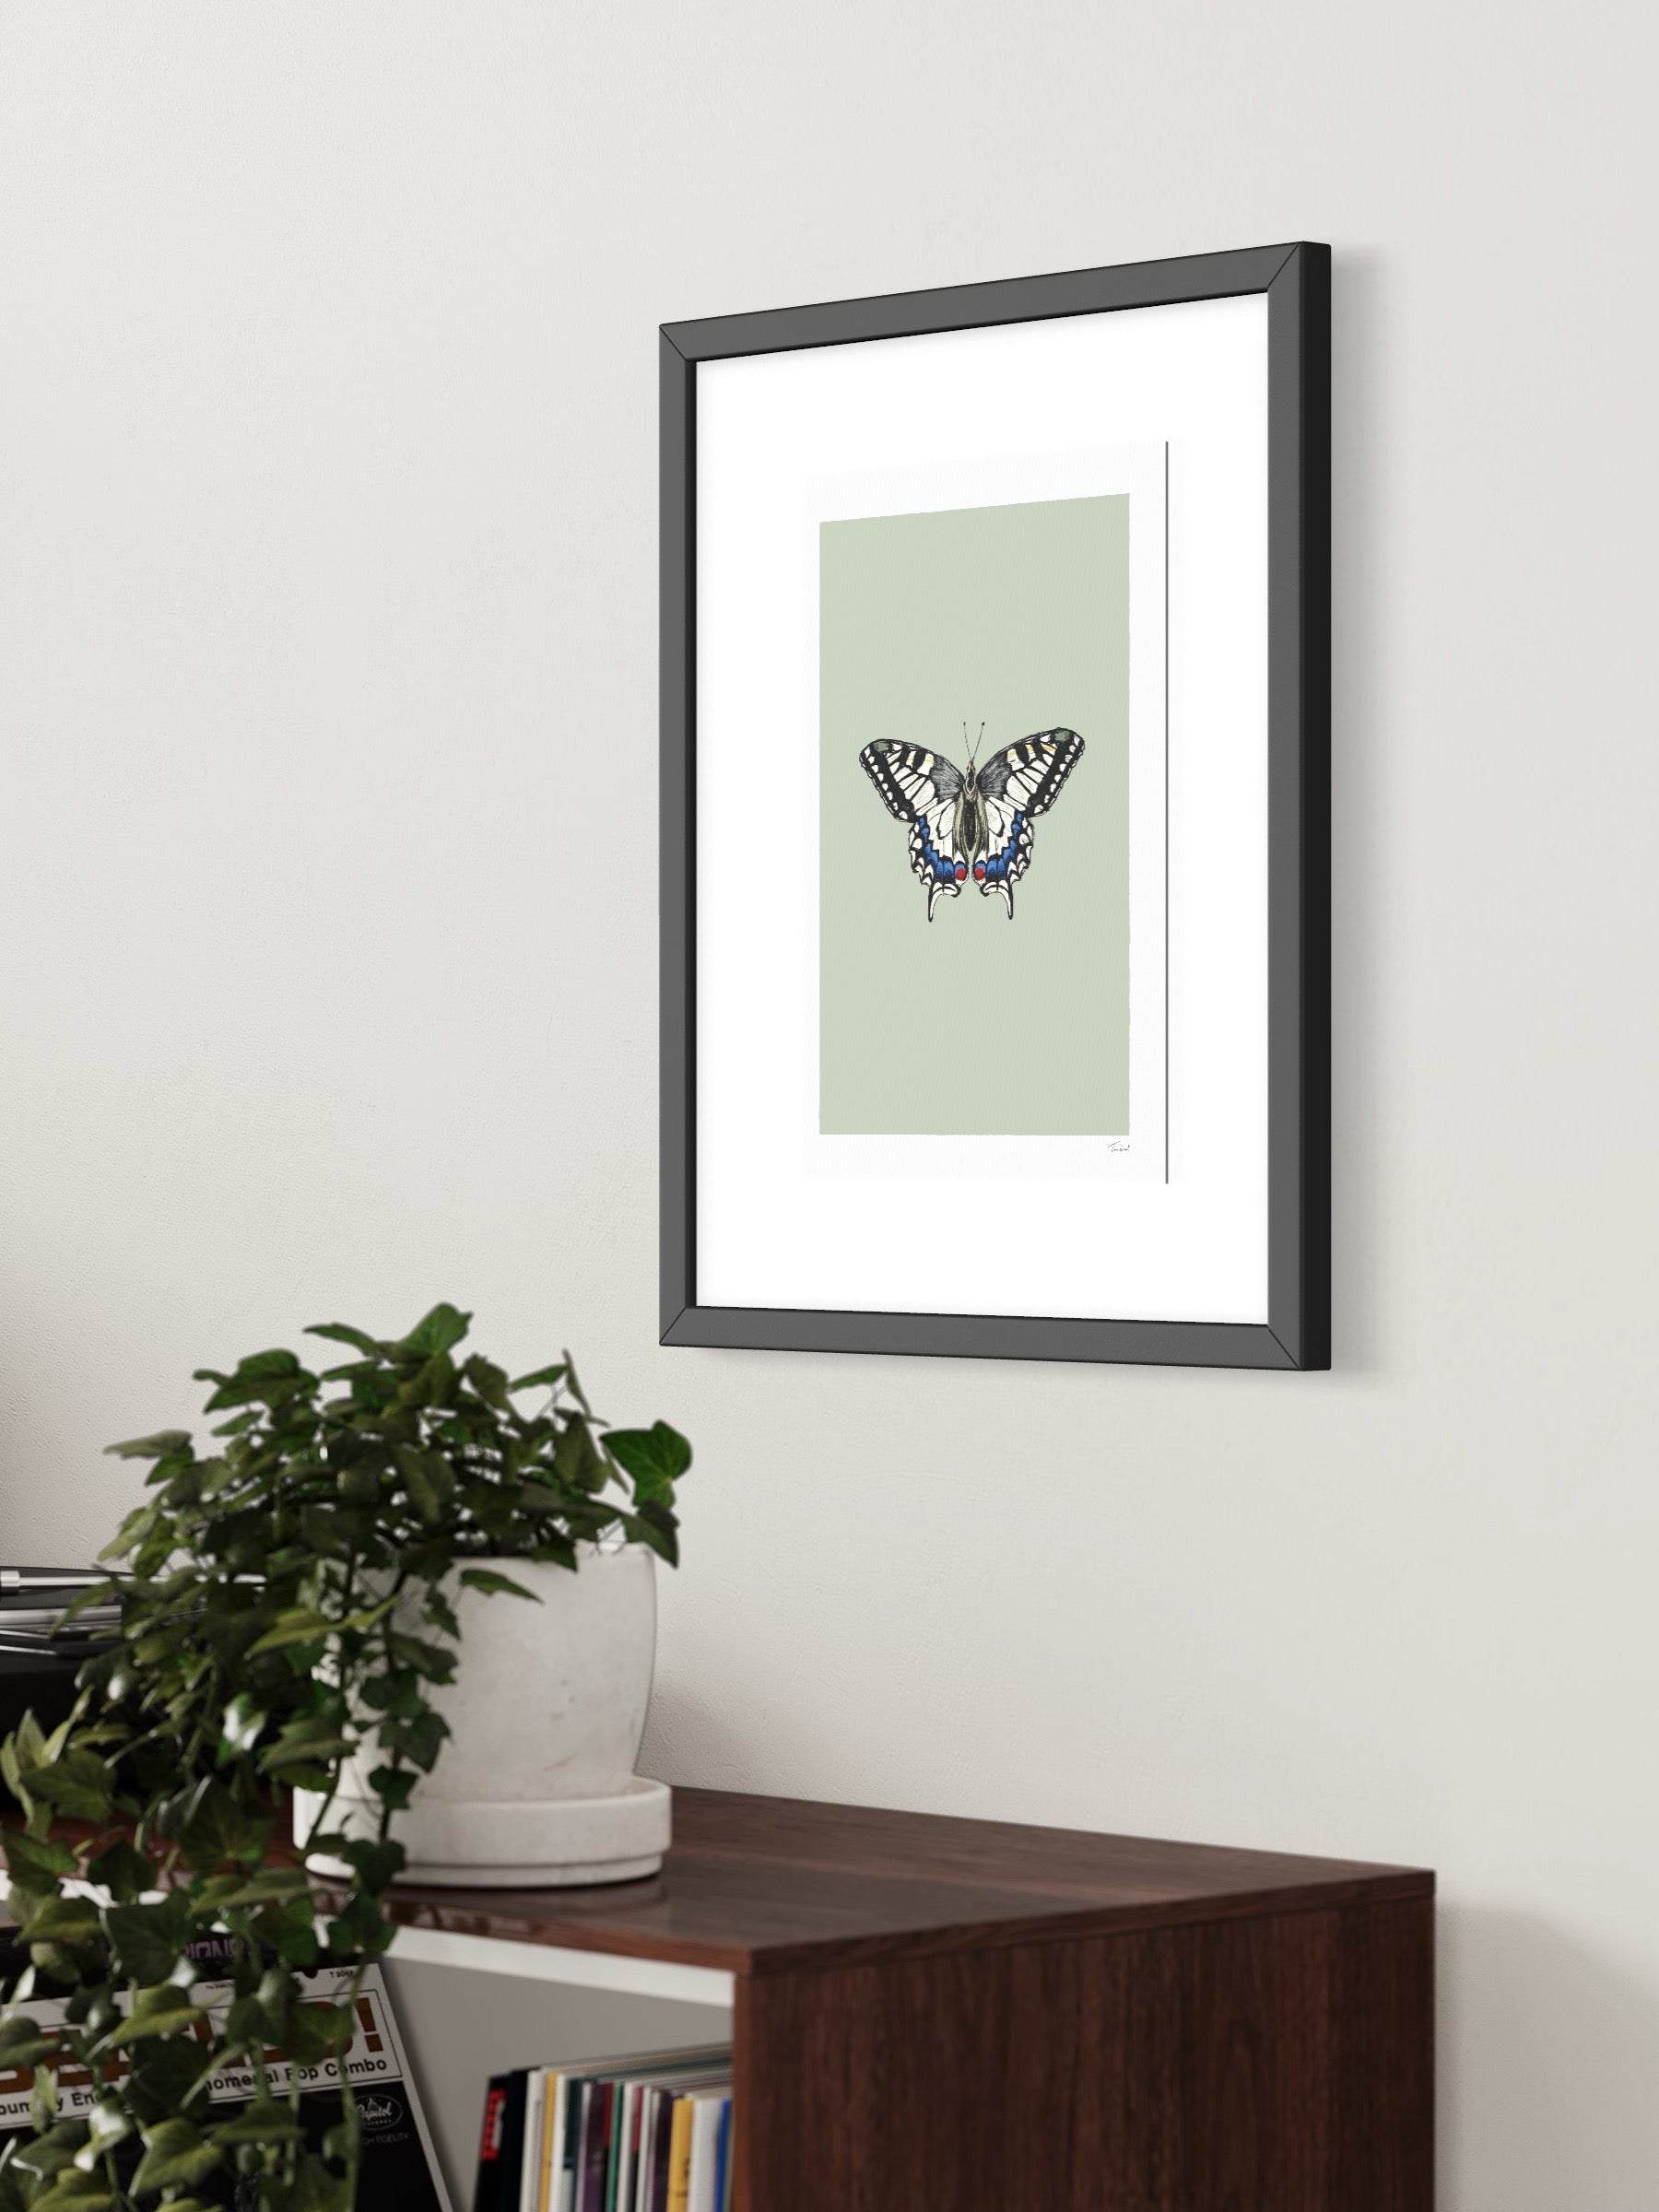 This image shows a giclee wall art print by Tom Laird Illustration of an Old World Swallowtail Butterfly, framed in a beautiful living room with tasteful modern home decor. This art print is available from Tom Laird Illustration in various sizes.